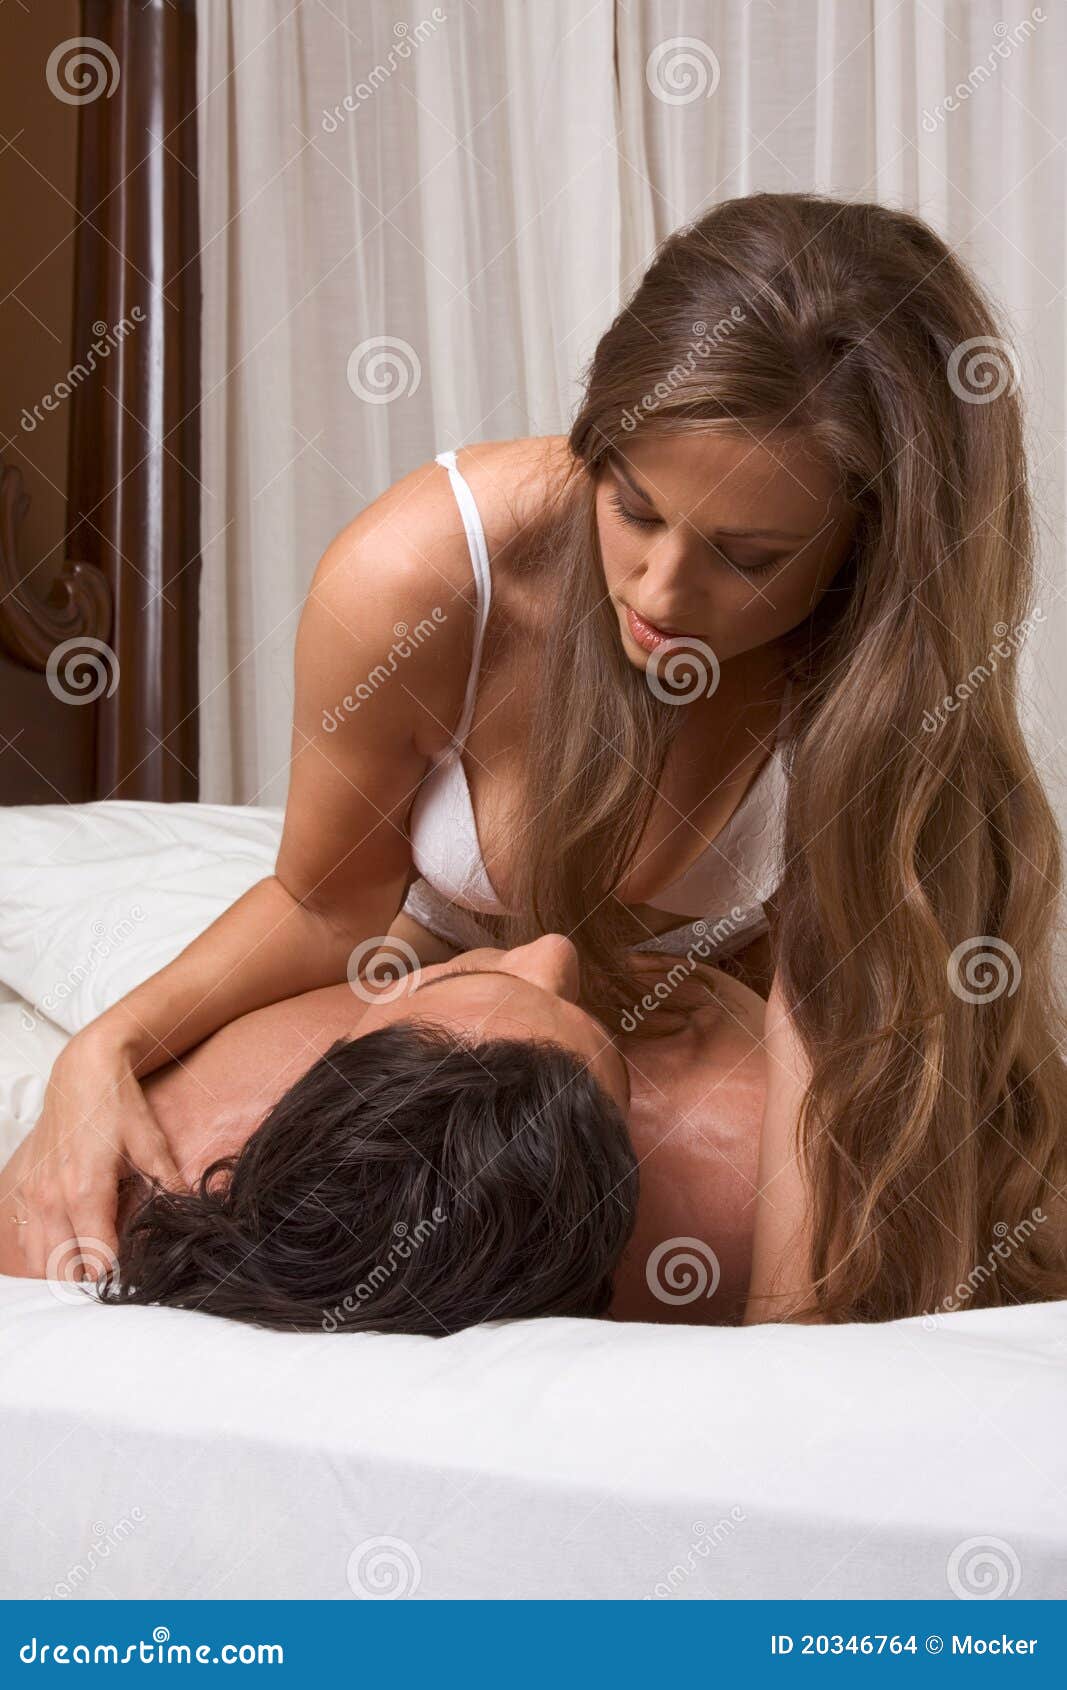 Sensual Heterosexual Couple in Lingerie on Bed Stock Photo picture